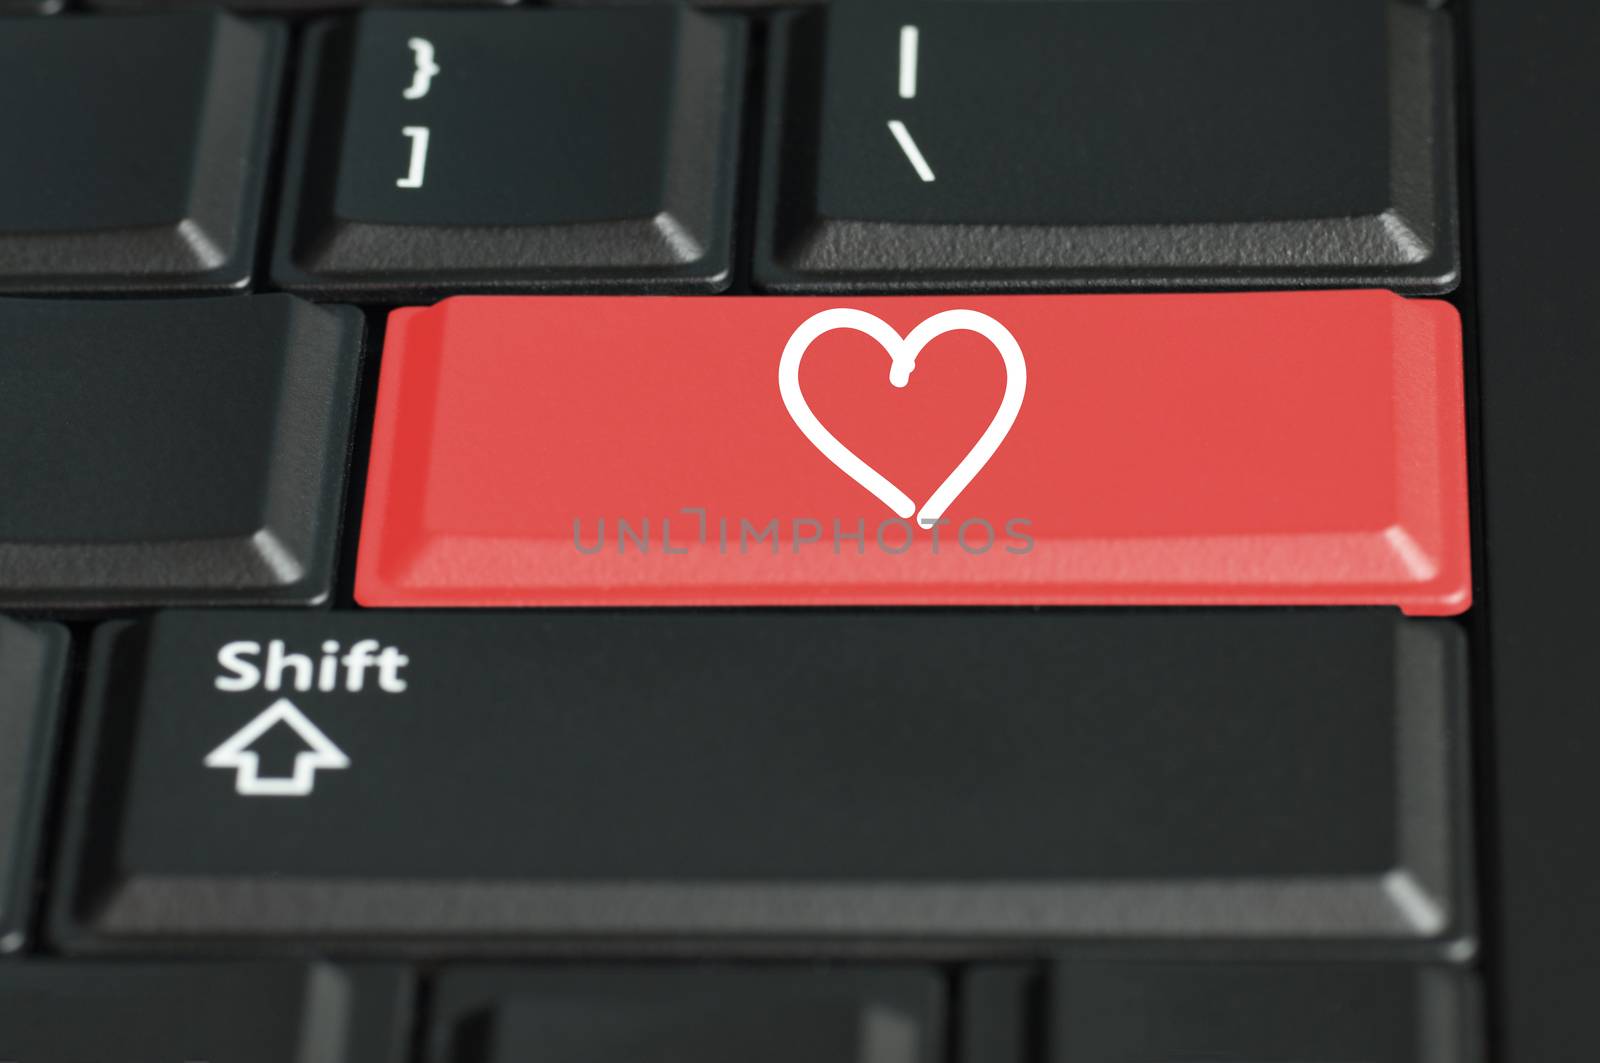 Concept of love call to  action. The focus is on the enter key with the shift button on the bottom